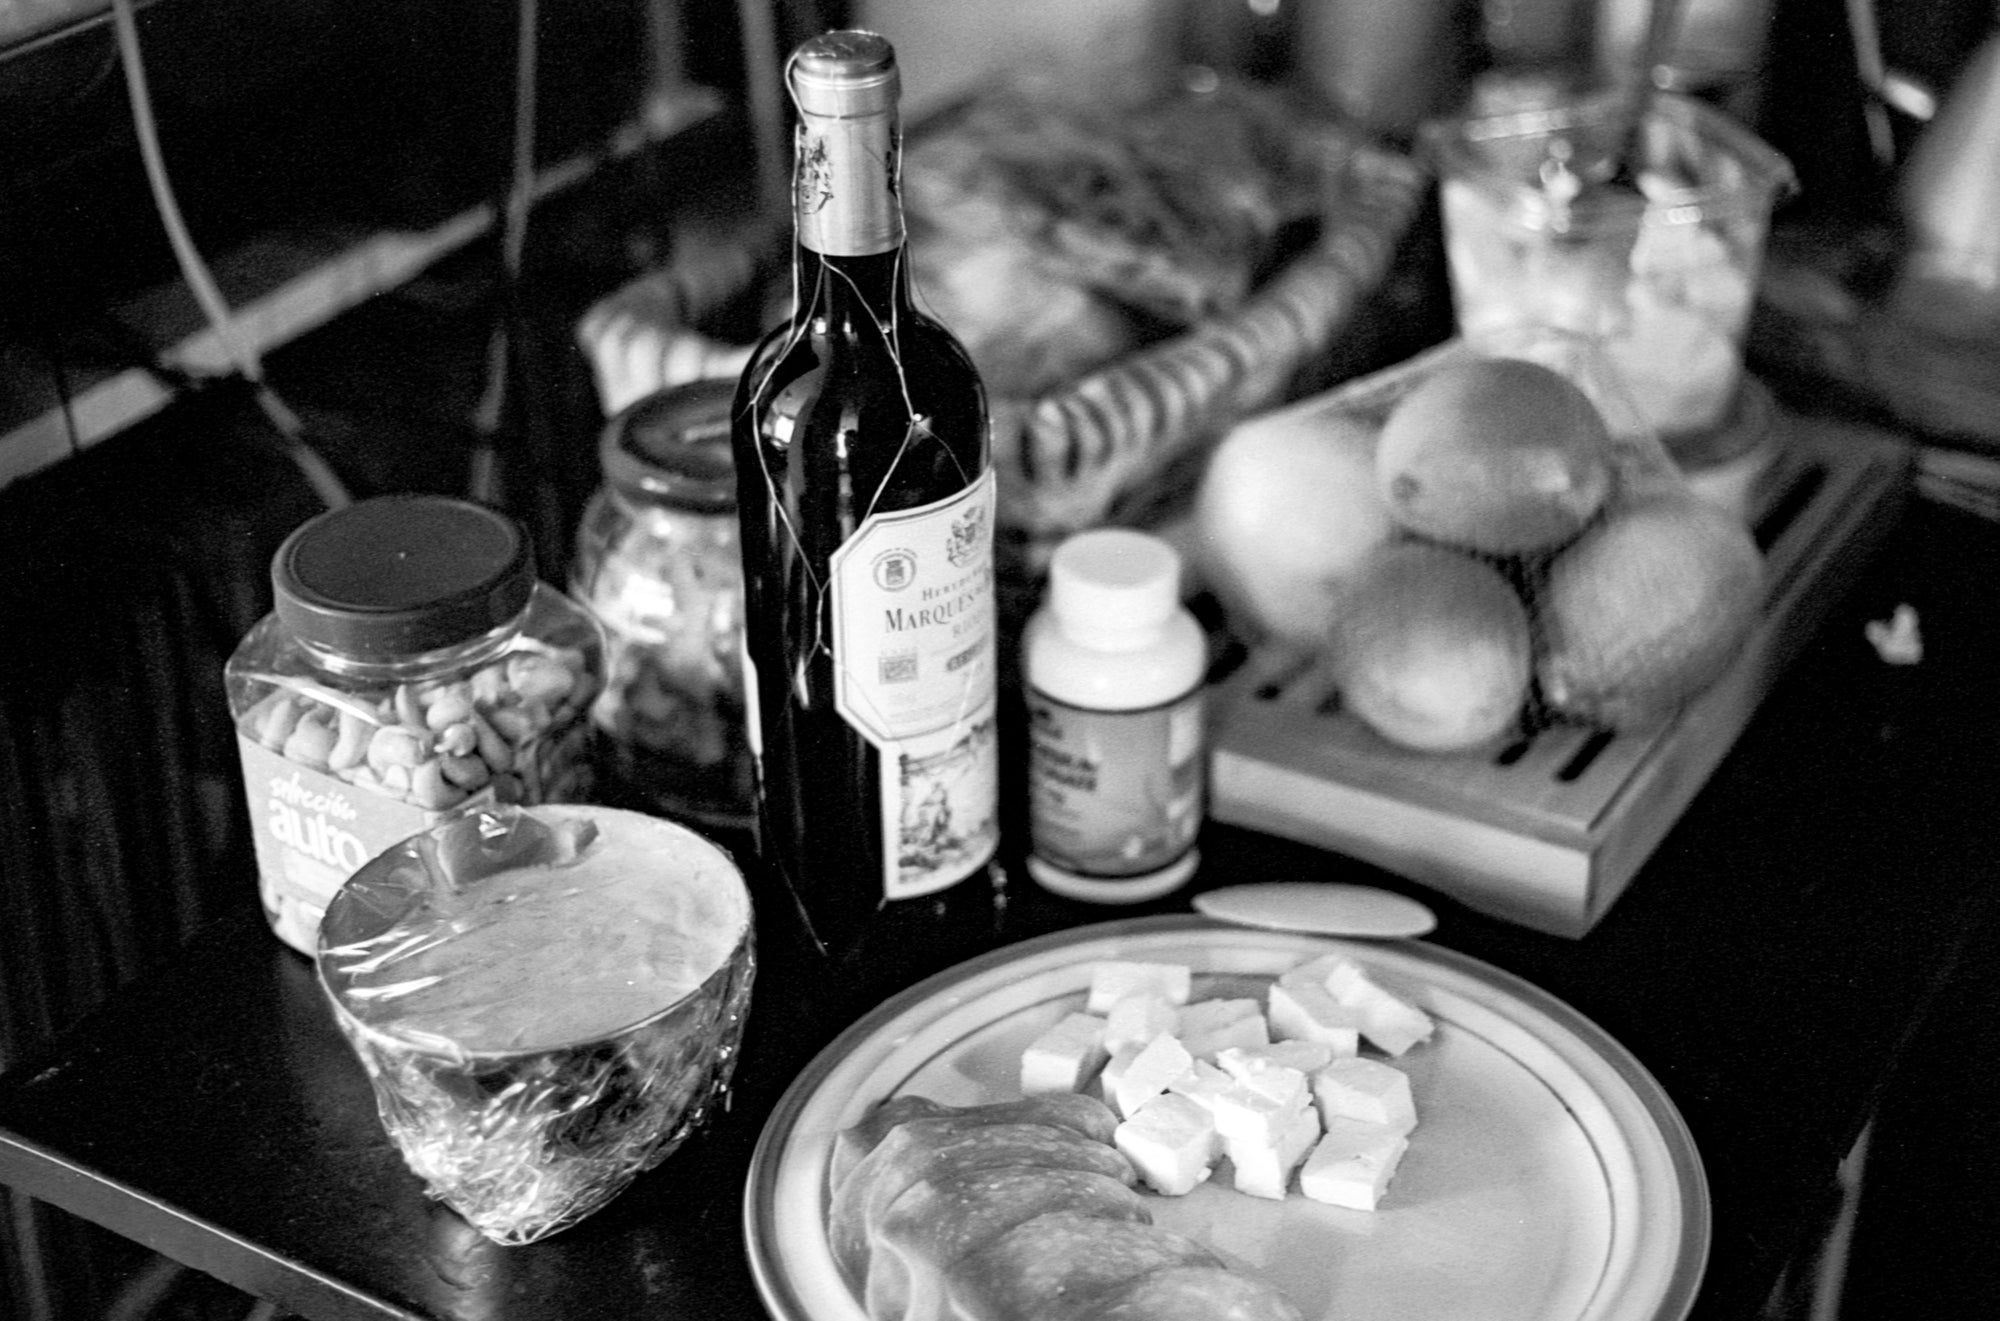 A table with dishes and bottles in B&W.